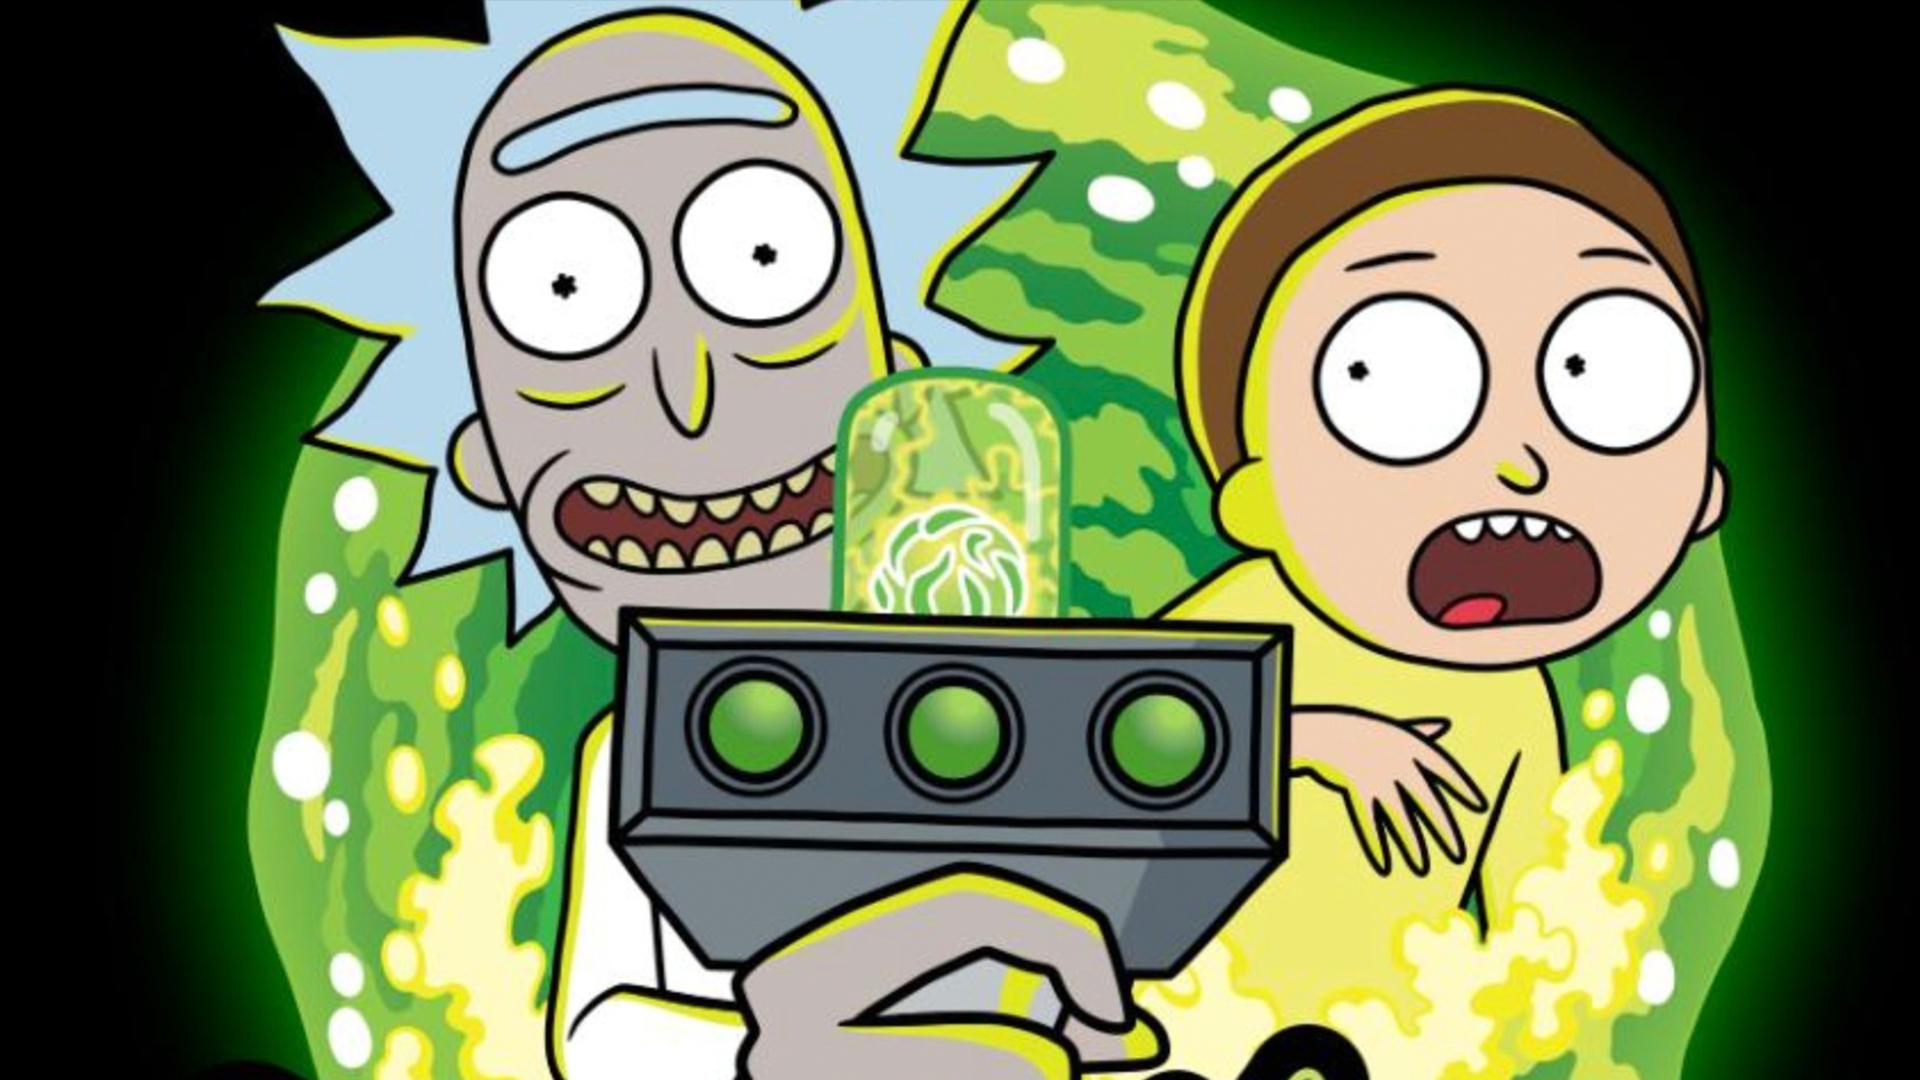 Rick and Morty Season 4 How to Watch Online